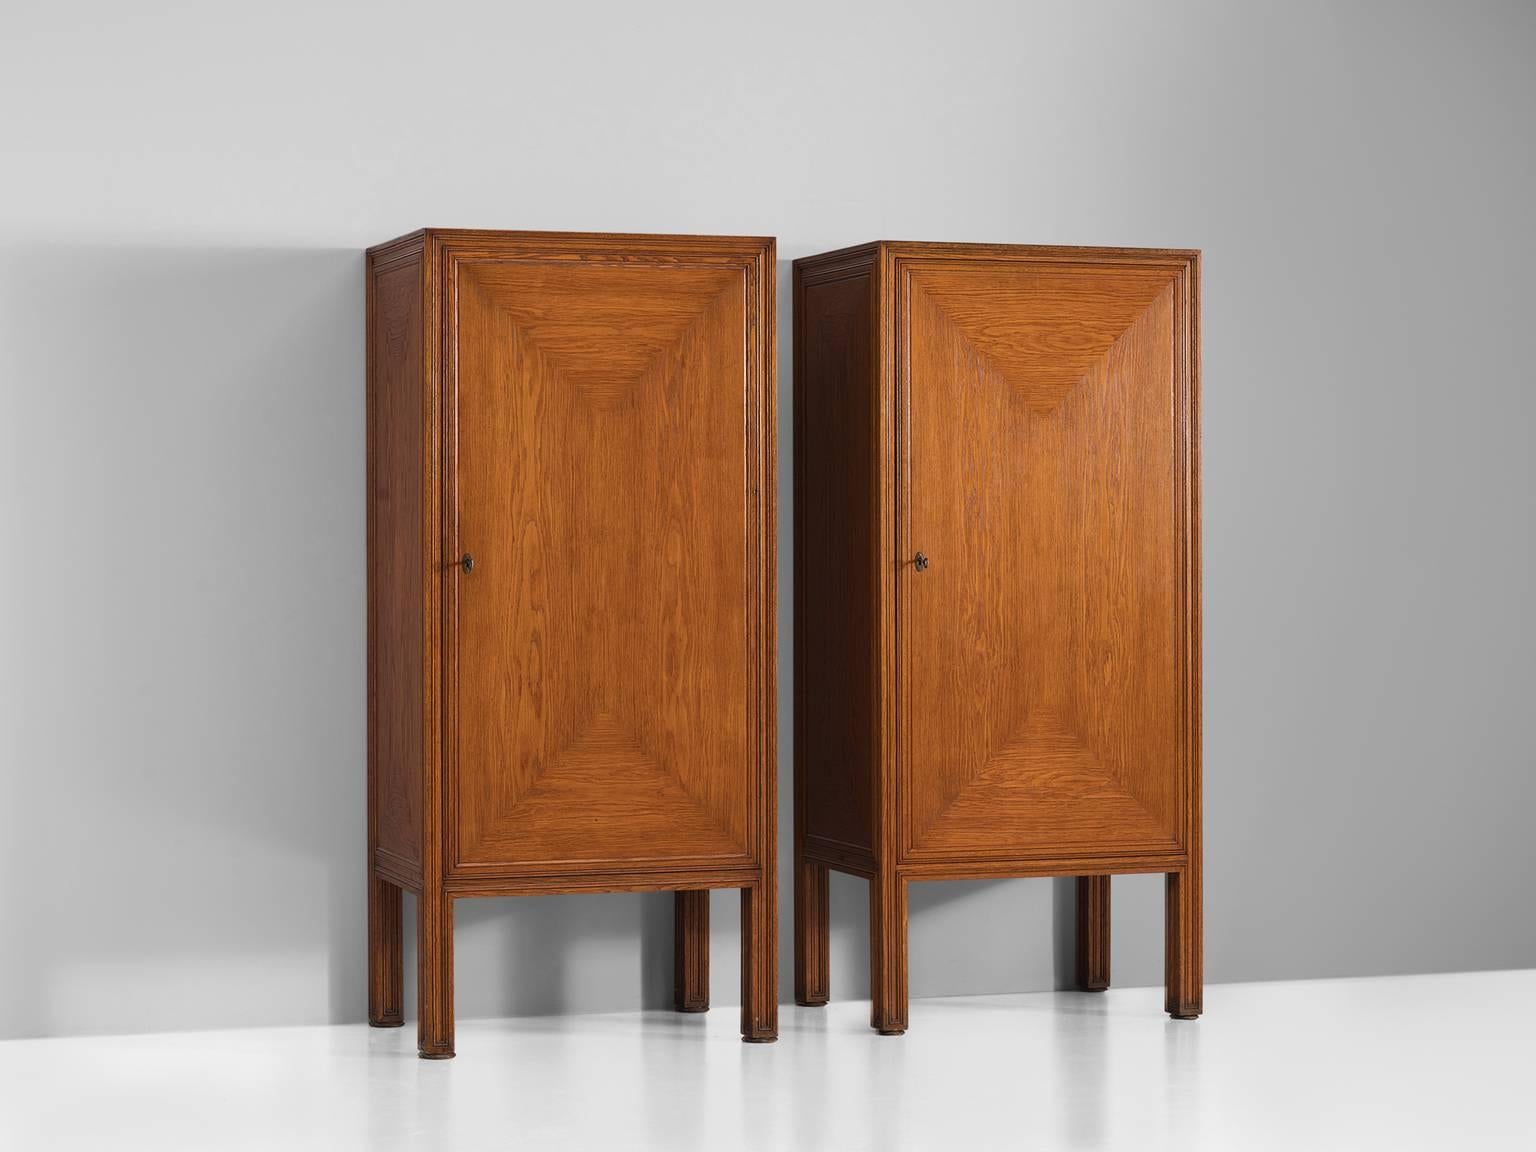 Danish cabinet maker, high cabinets, stained oak, Denmark, 1960s.

These elegant high cabinets are wonderfully executed and seem to have traits of the level of Rud Rasmussen. The grain of the wood is bookmatched and used to create and abstract,